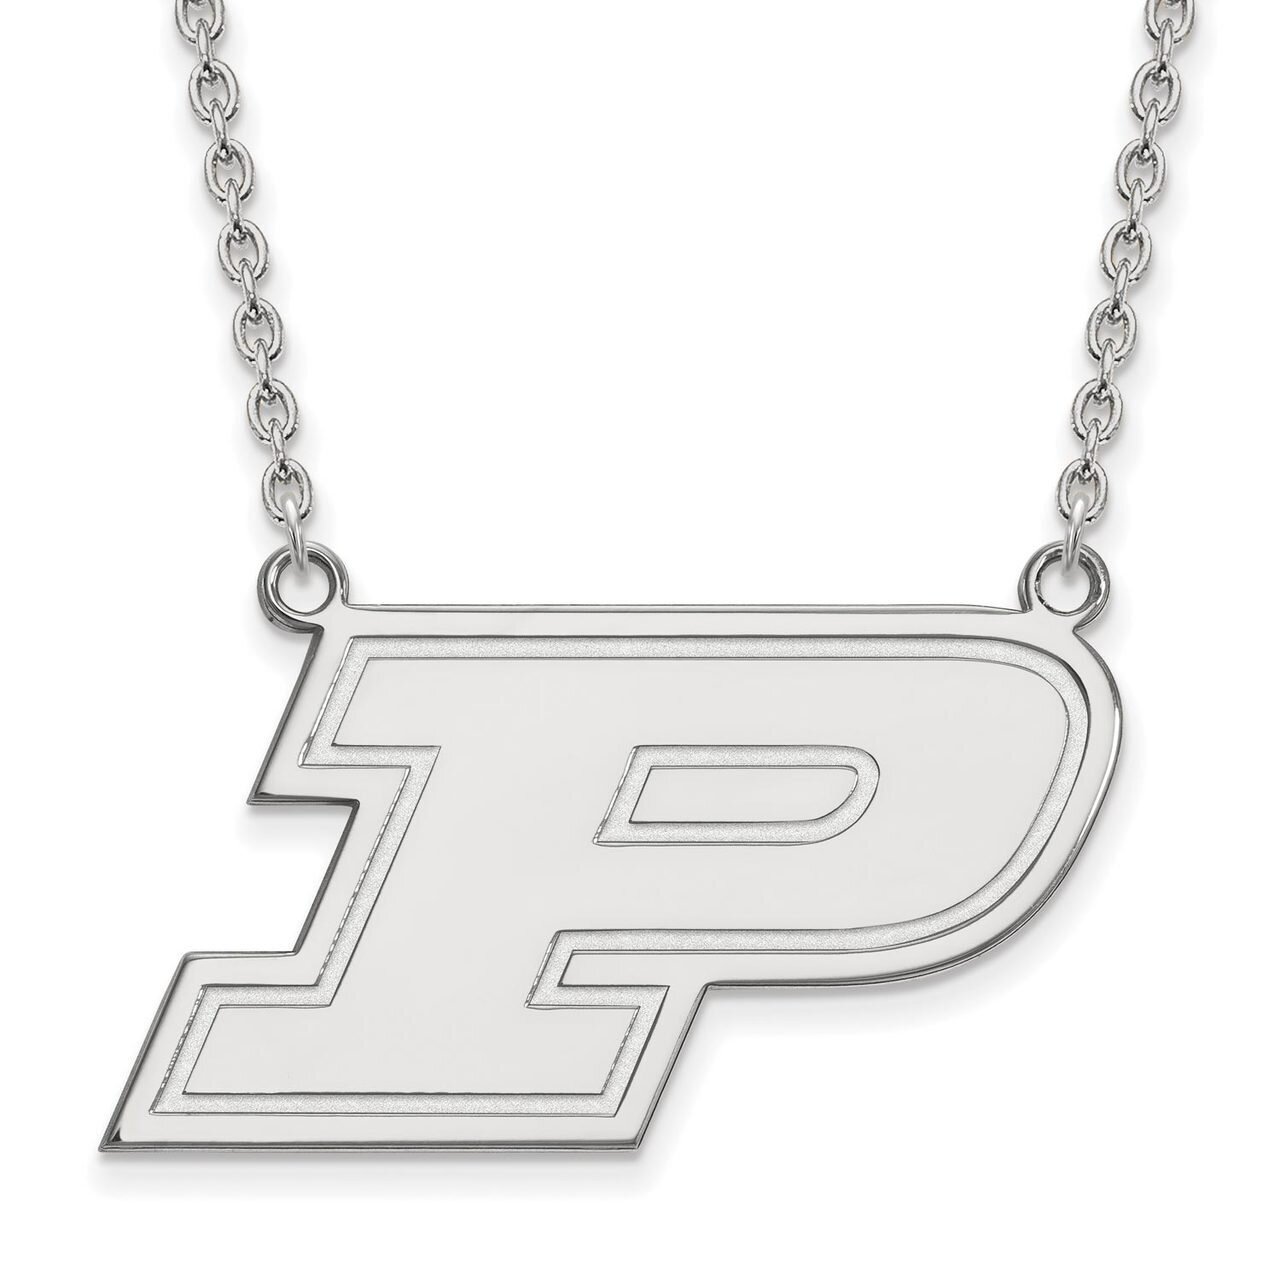 Purdue Large Pendant with Chain Necklace Sterling Silver SS015PU-18